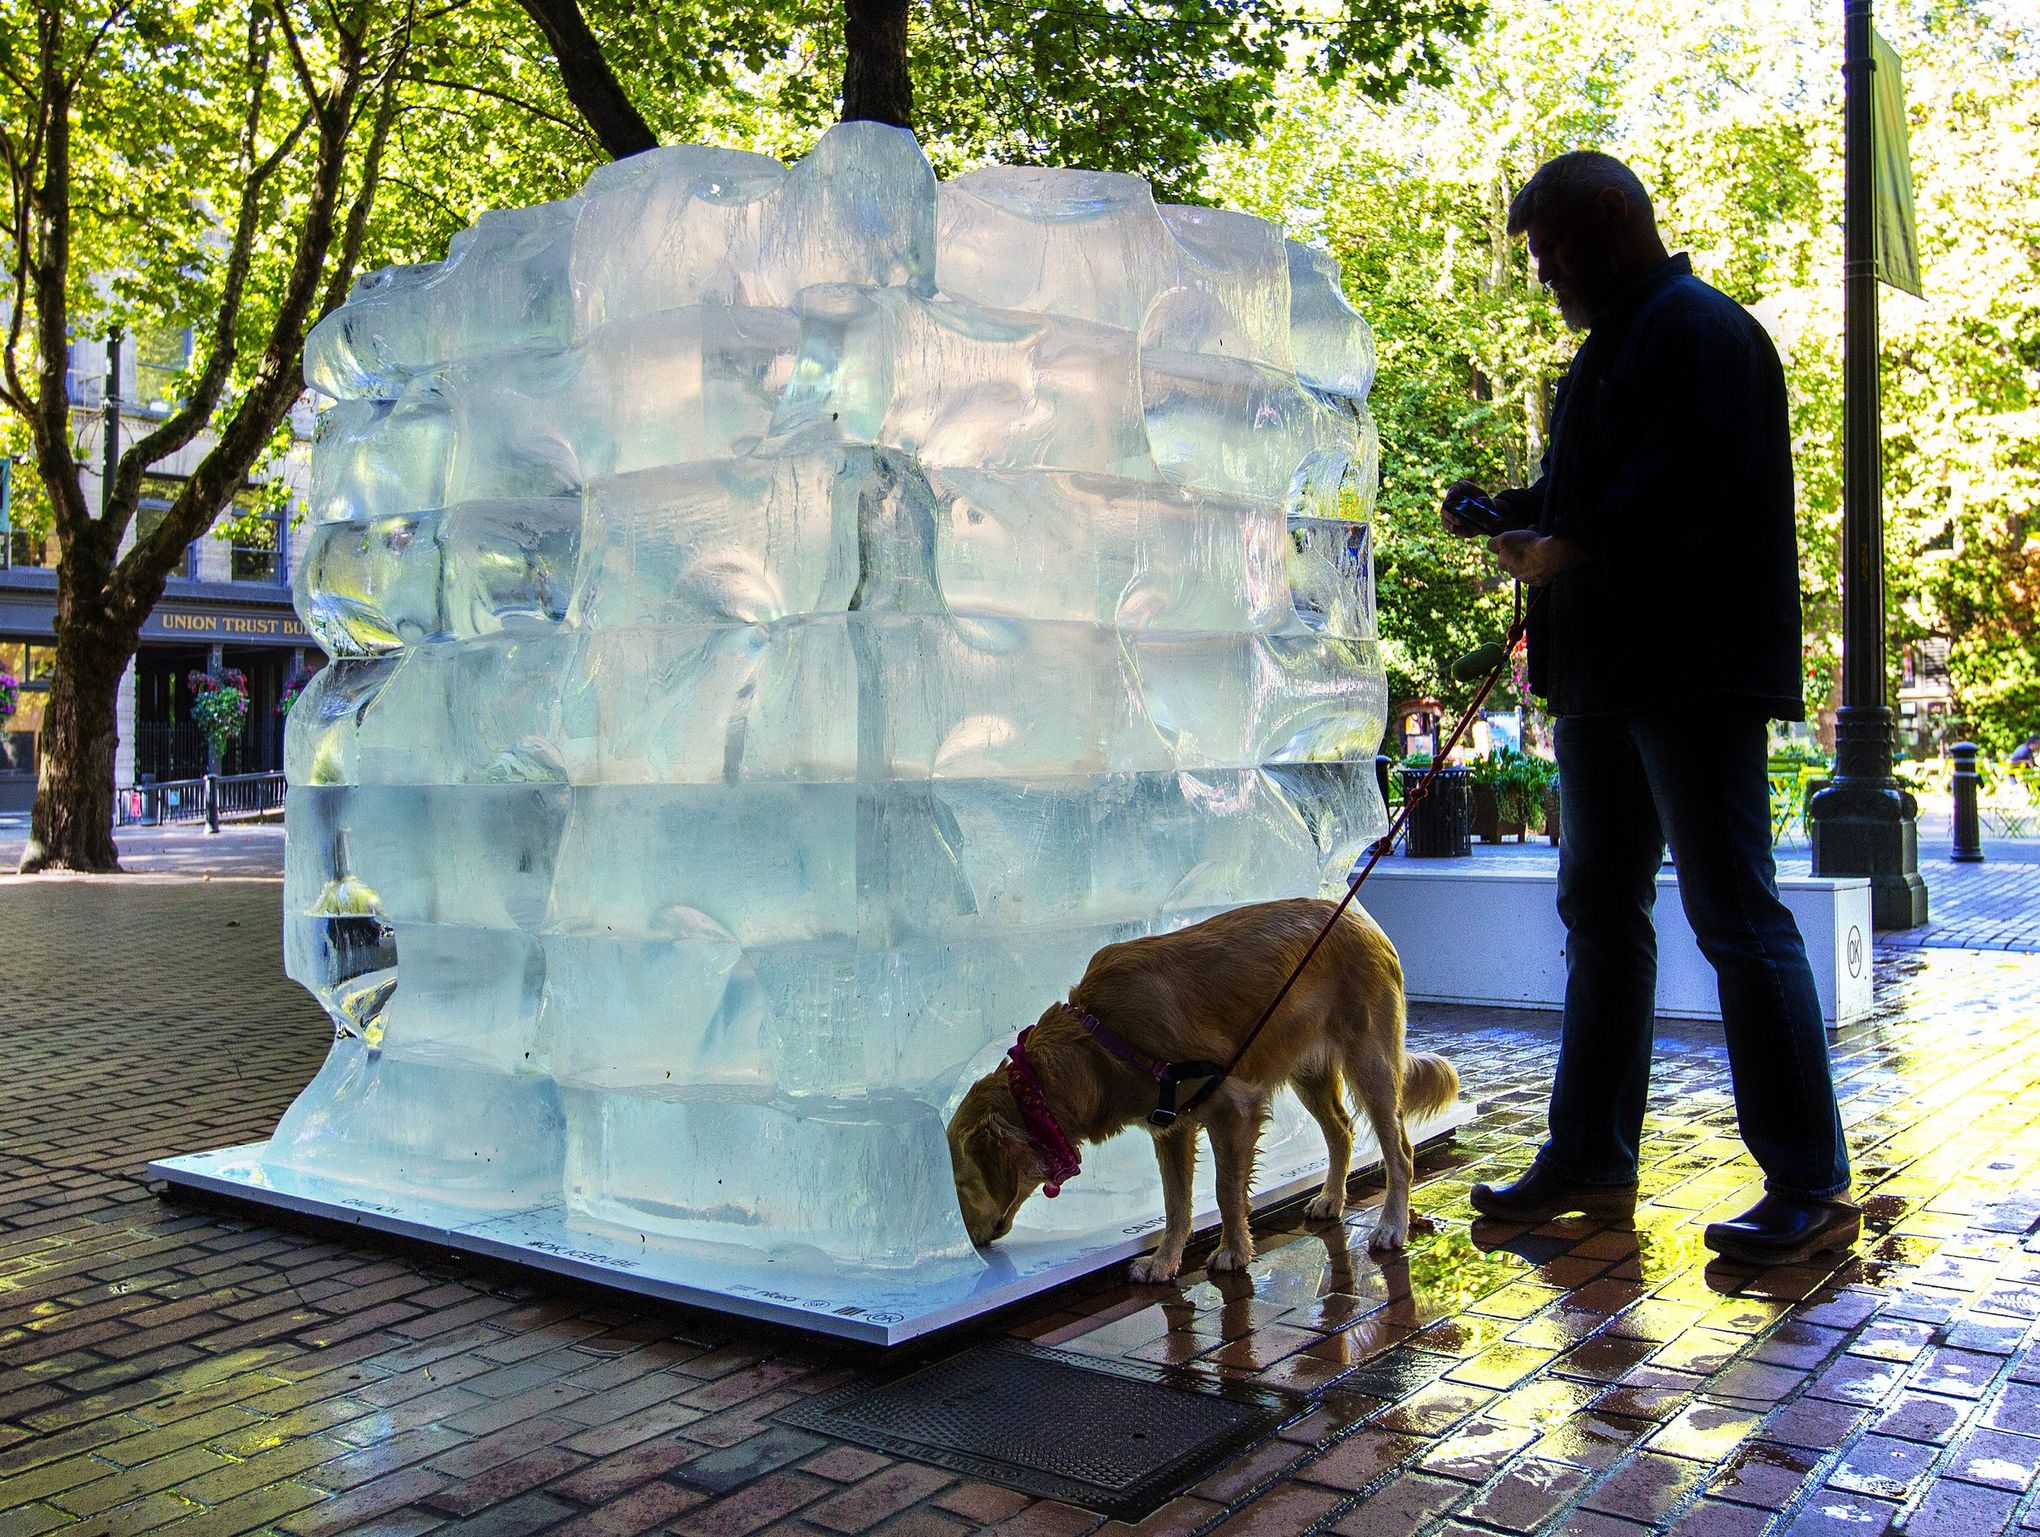 How long will it take this giant ice cube to melt in Seattle? 